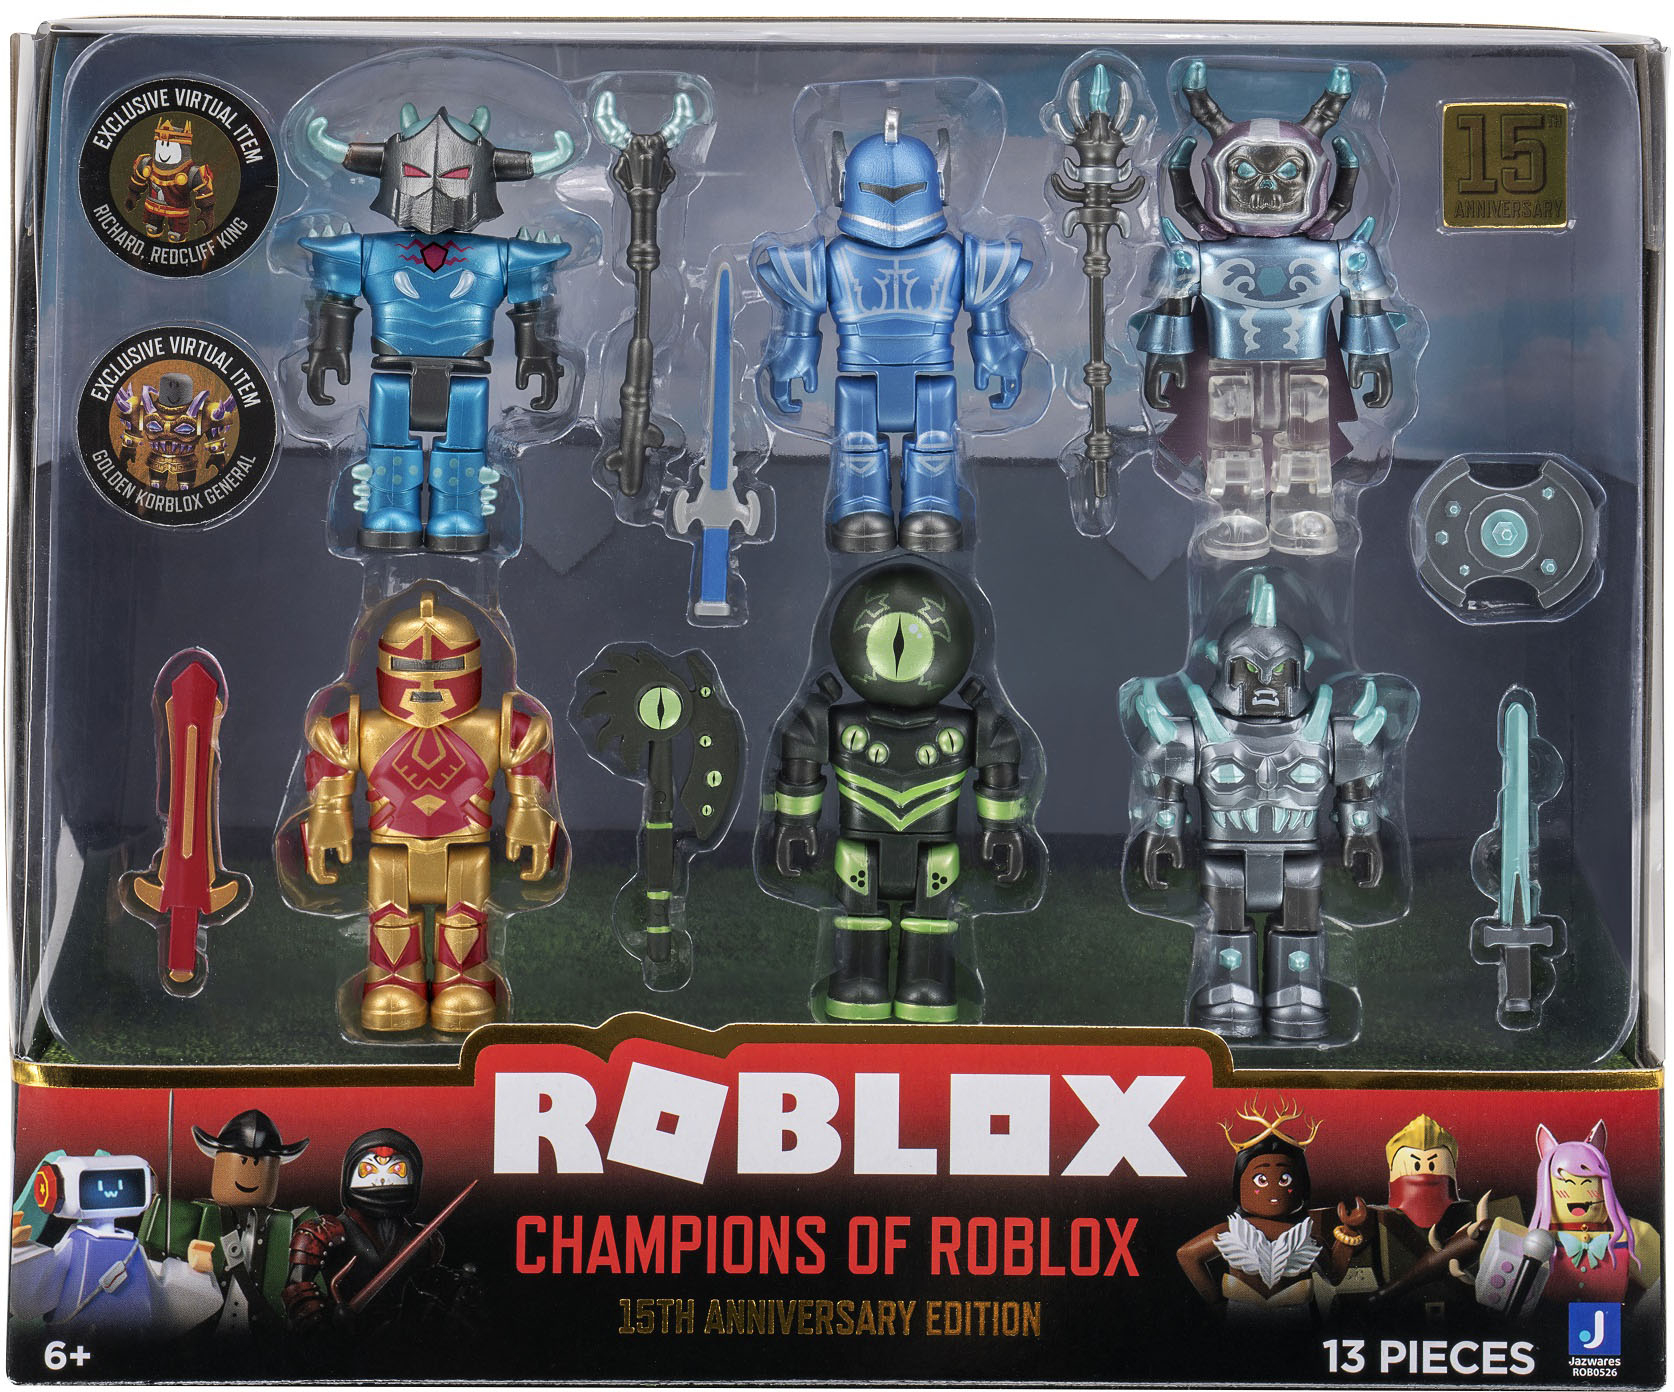 Jazwares' DevSeries Collection Brings Virtual Roblox Games to the Toy Box -  The Toy Insider